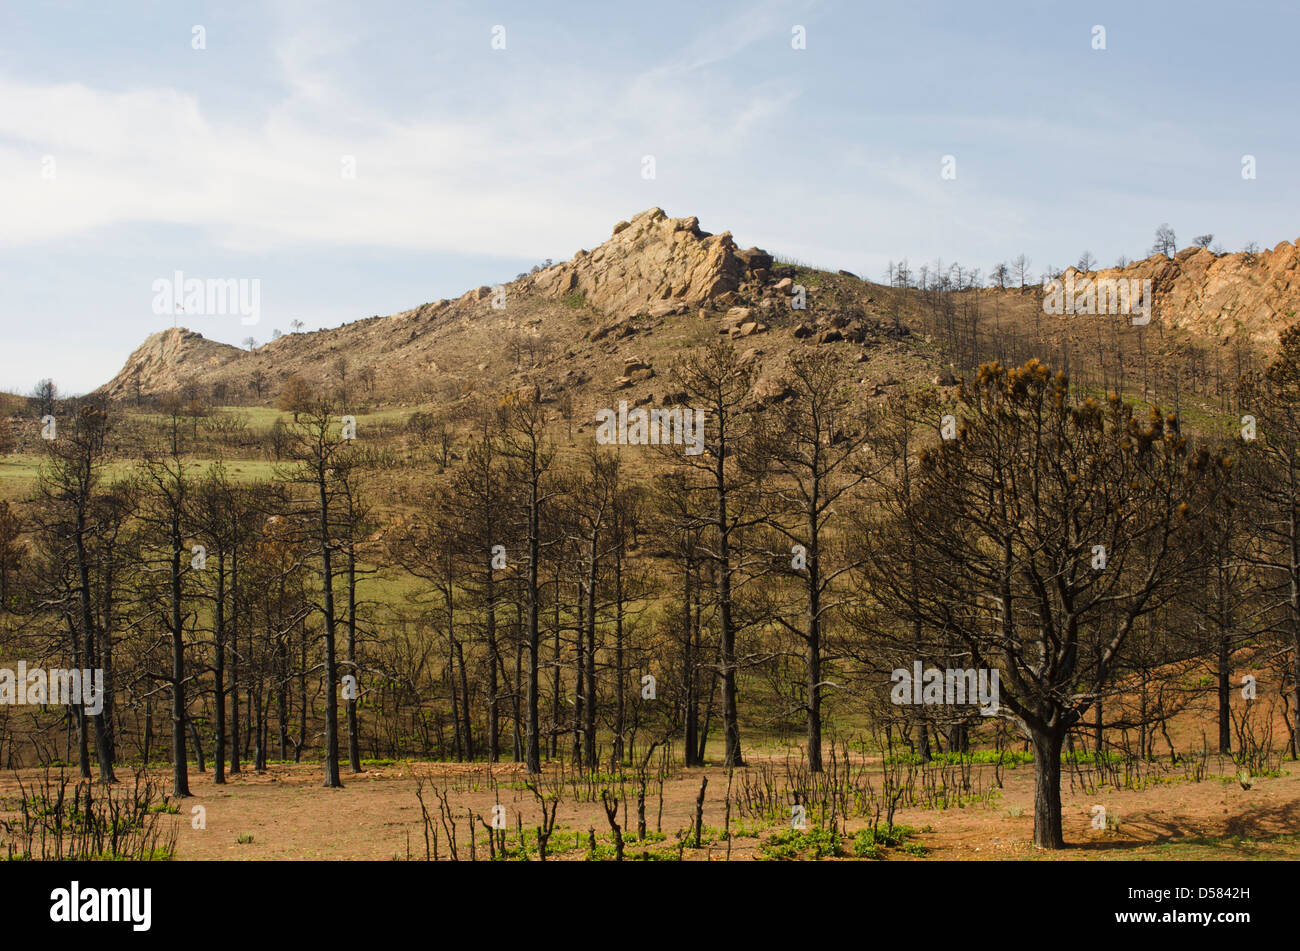 The scorched pine trees stand out in a landscape devastated by the Waldo Canyon Fire in Colorado Springs, Colorado. Stock Photo